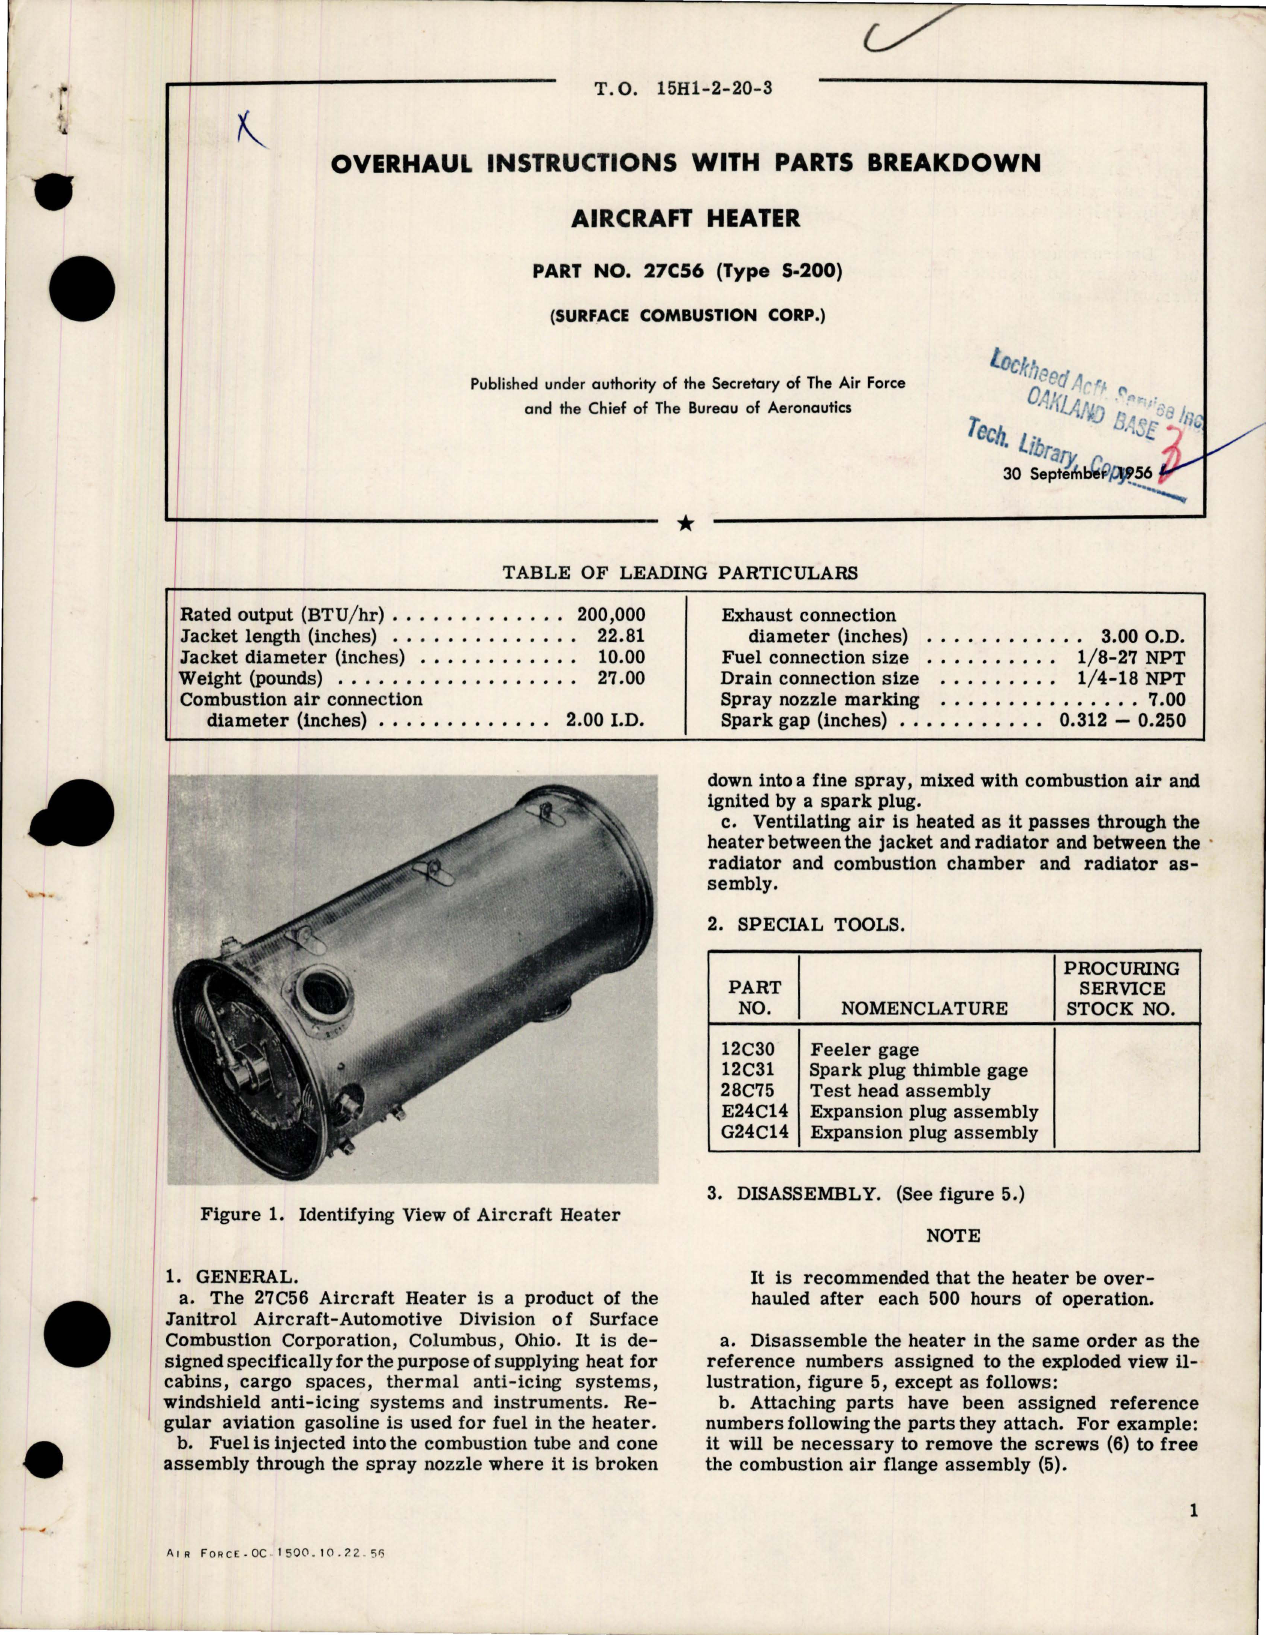 Sample page 1 from AirCorps Library document: Overhaul Instructions with Parts Breakdown for Aircraft Heater - Part 27C56 - Type S-200 